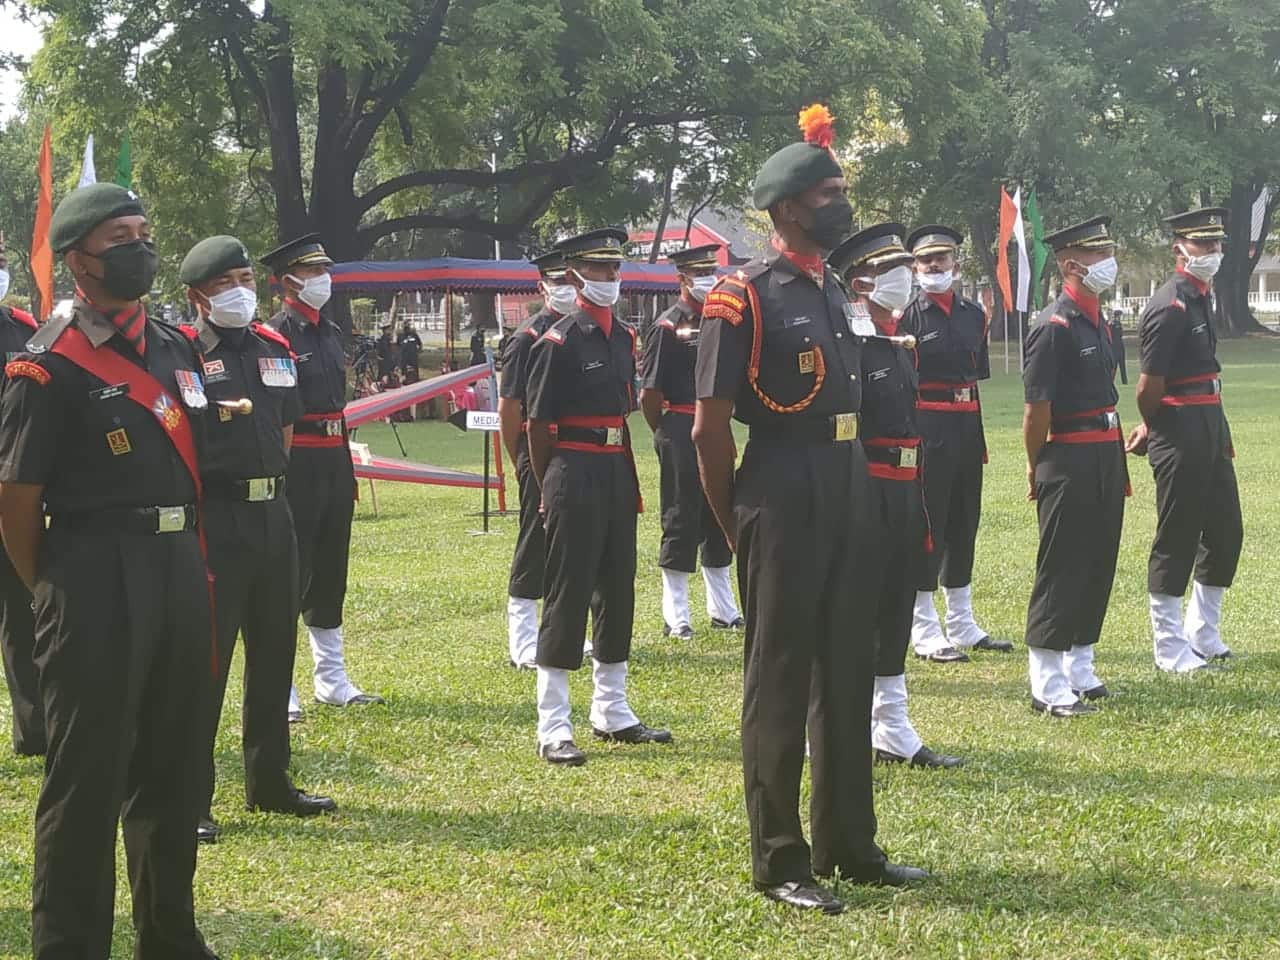 Pipping ceremony held during Passing out Parade (PoP) in Dehradun